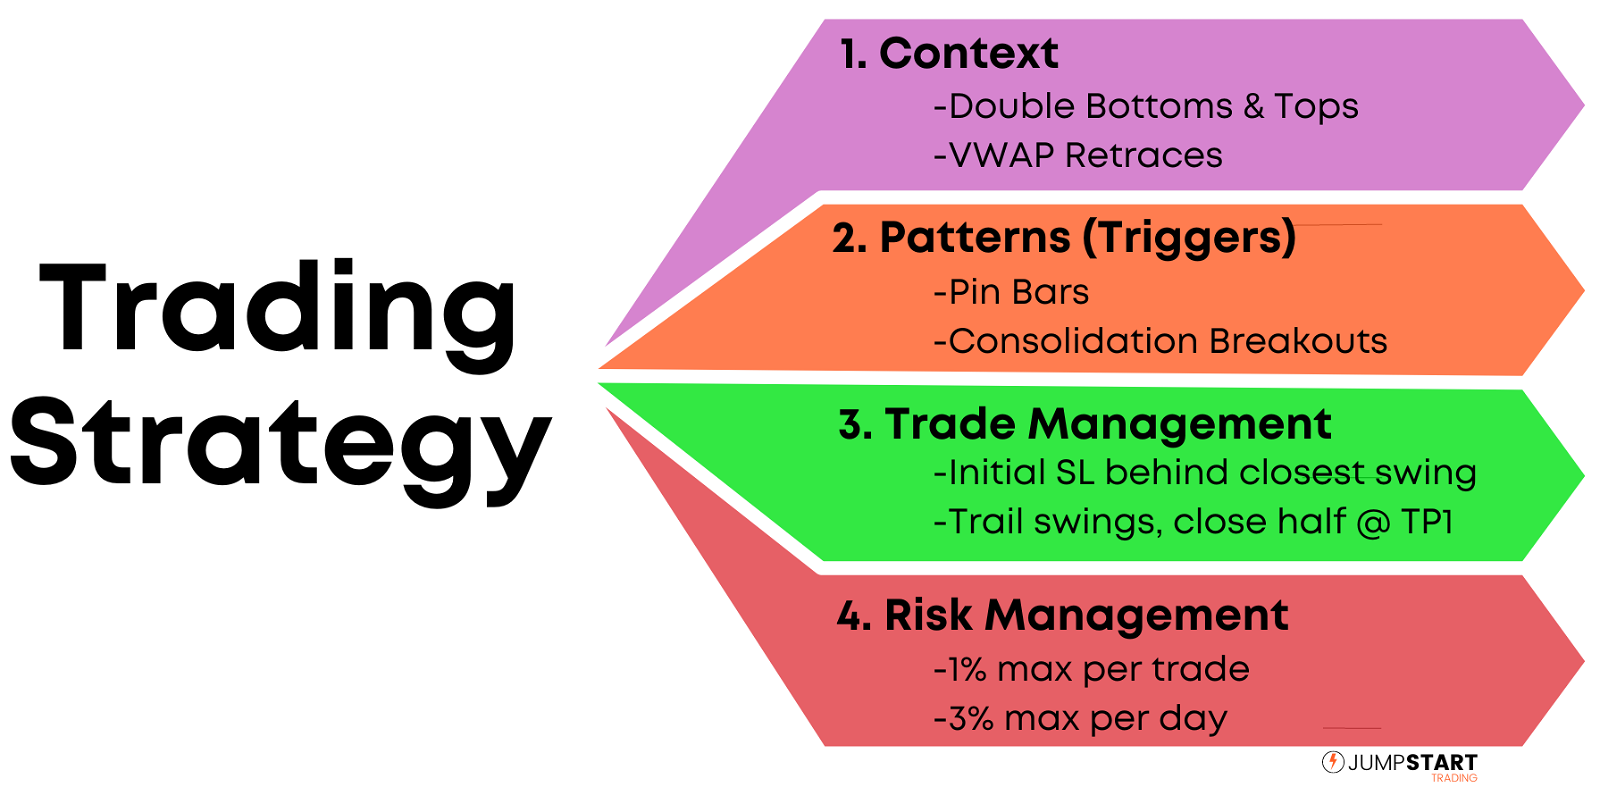 List of trading strategy components including Context, Patterns, Trade Management, and Risk Management